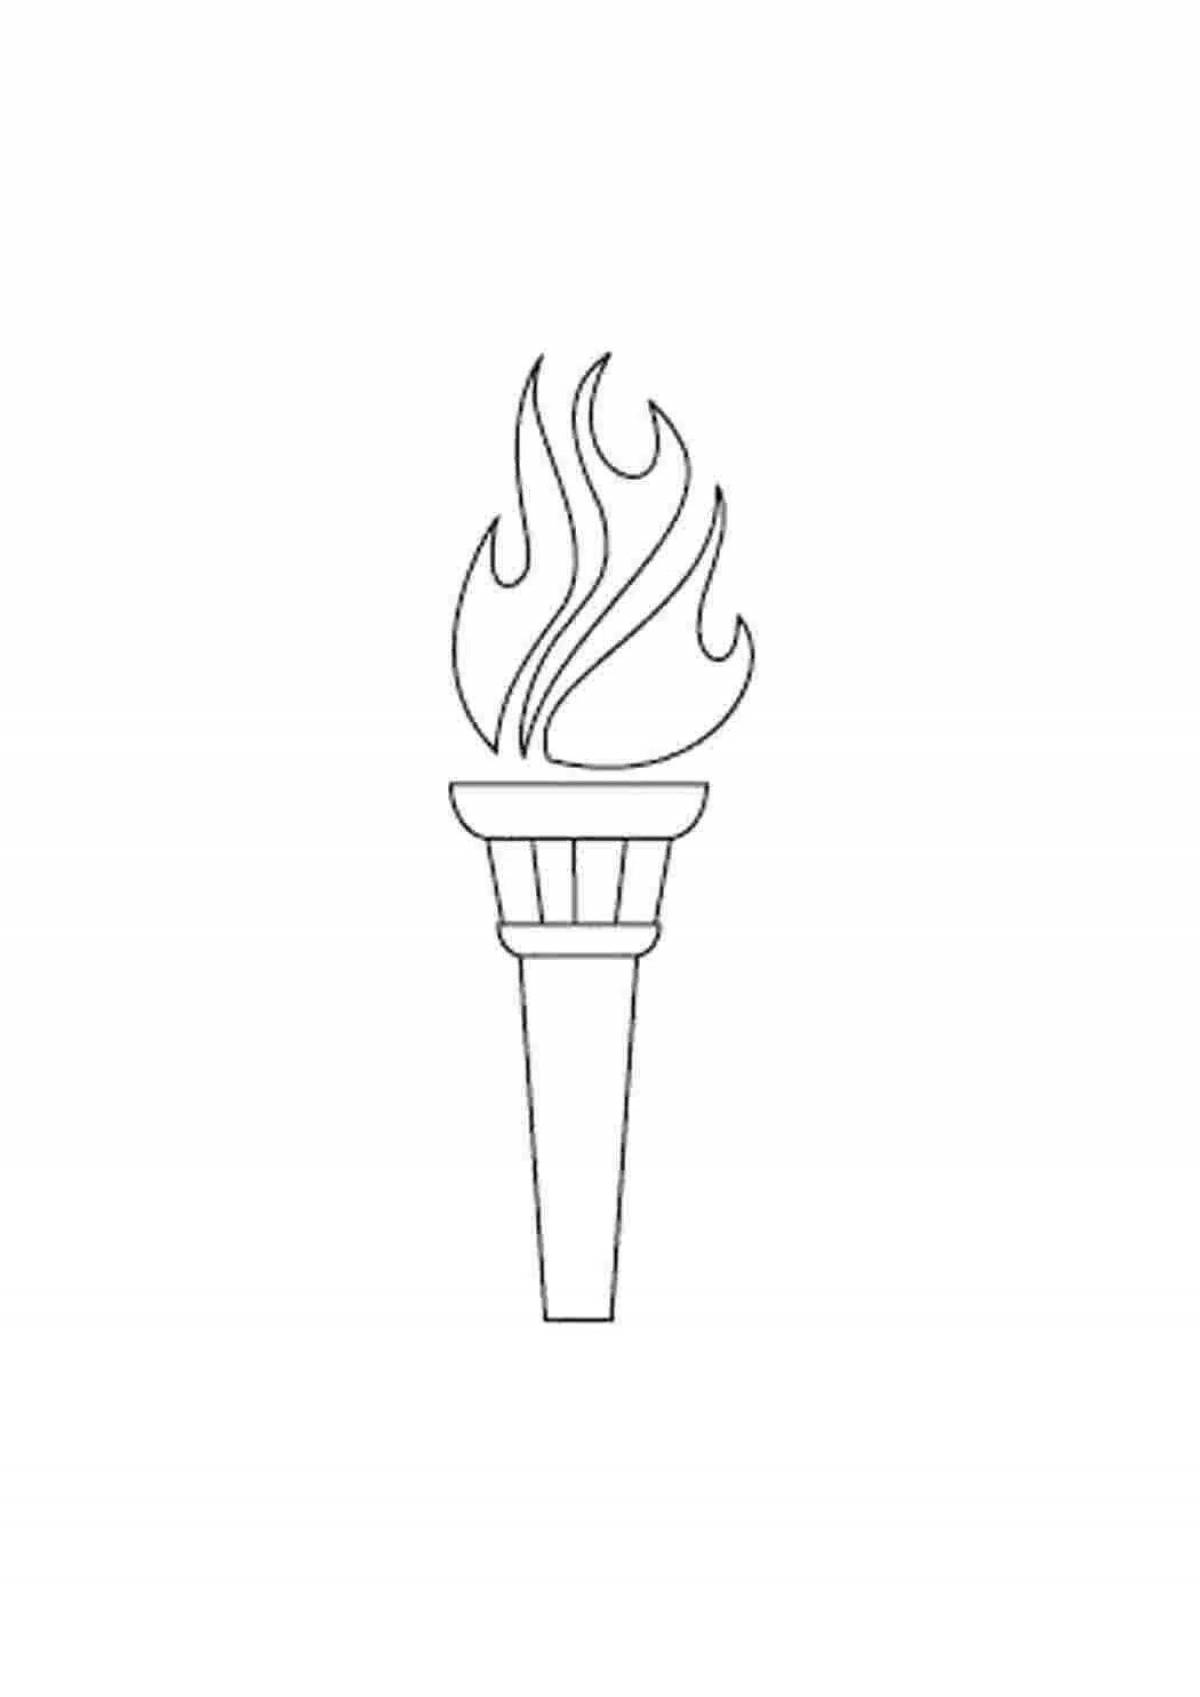 Exquisite torch coloring book for kids